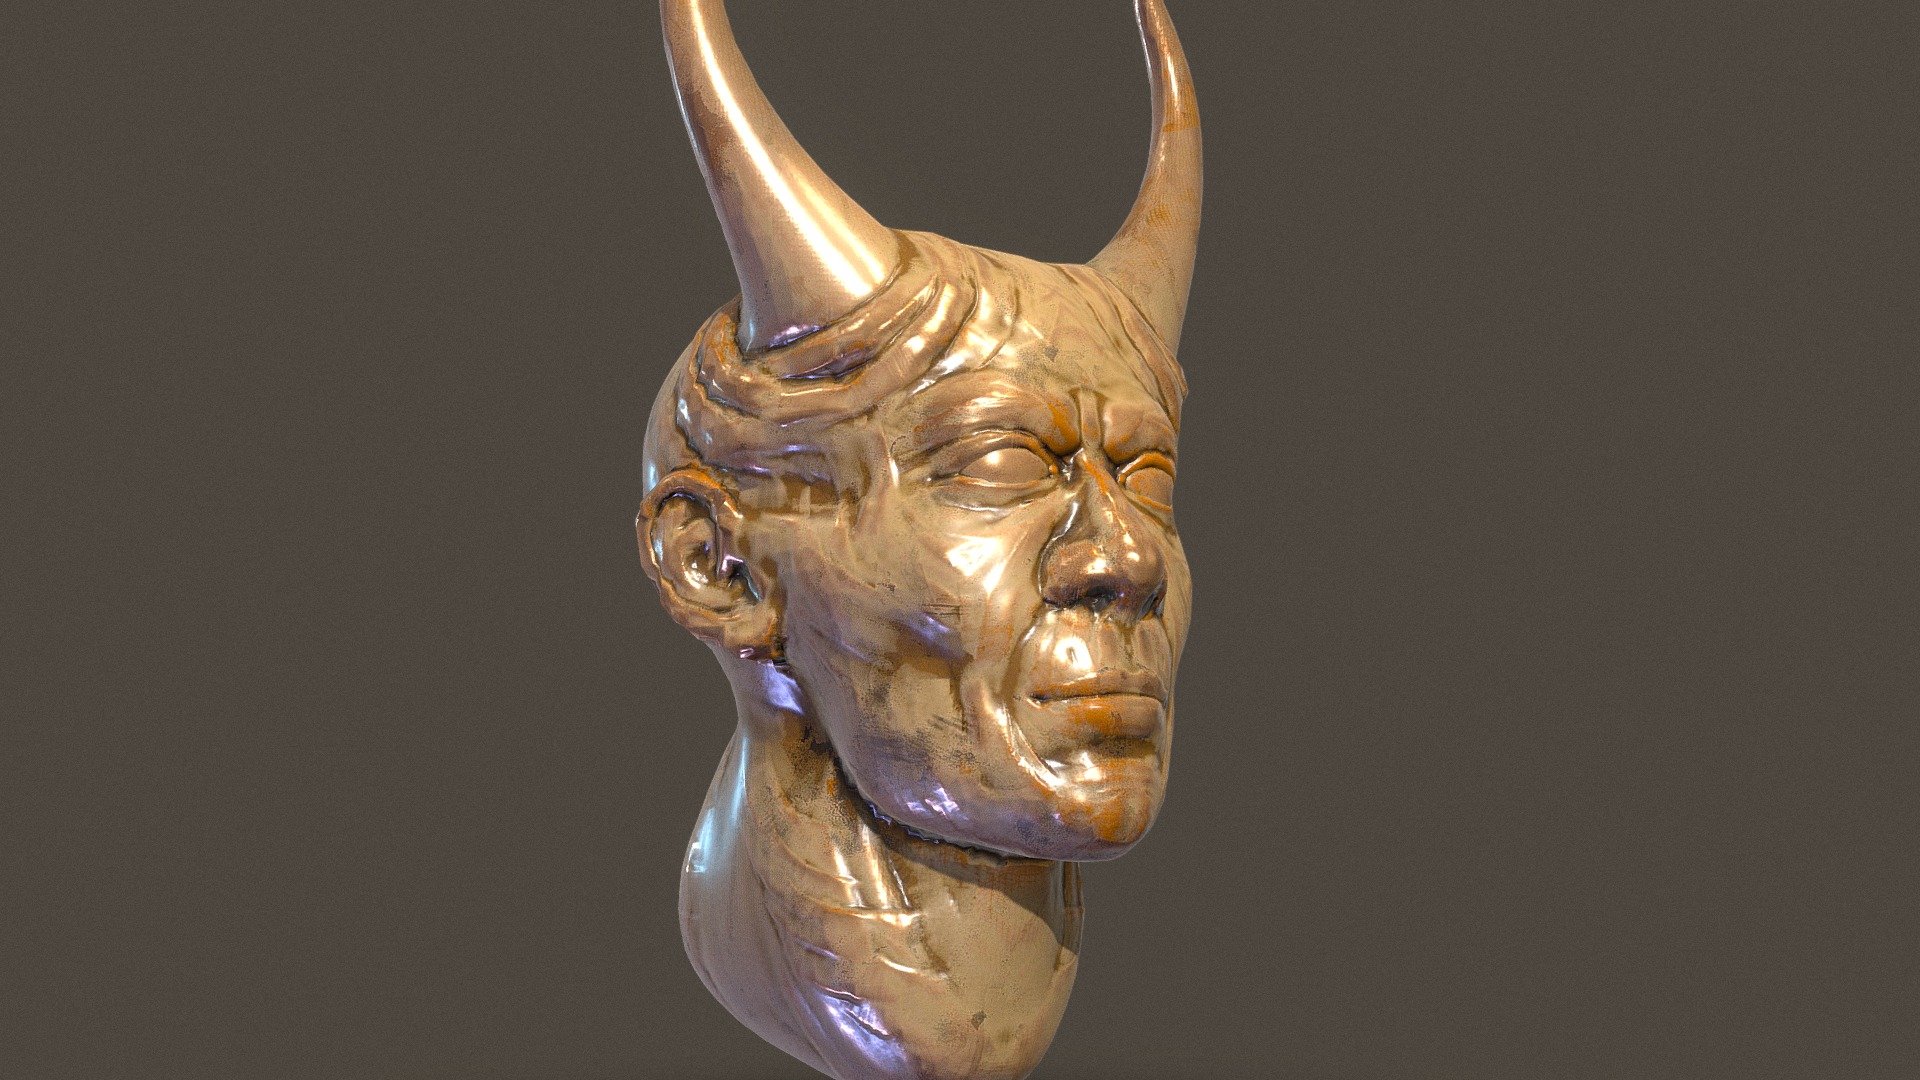 A tiefling is born from a mating between a human and a devil.  This Tiefling is quite old 3d model